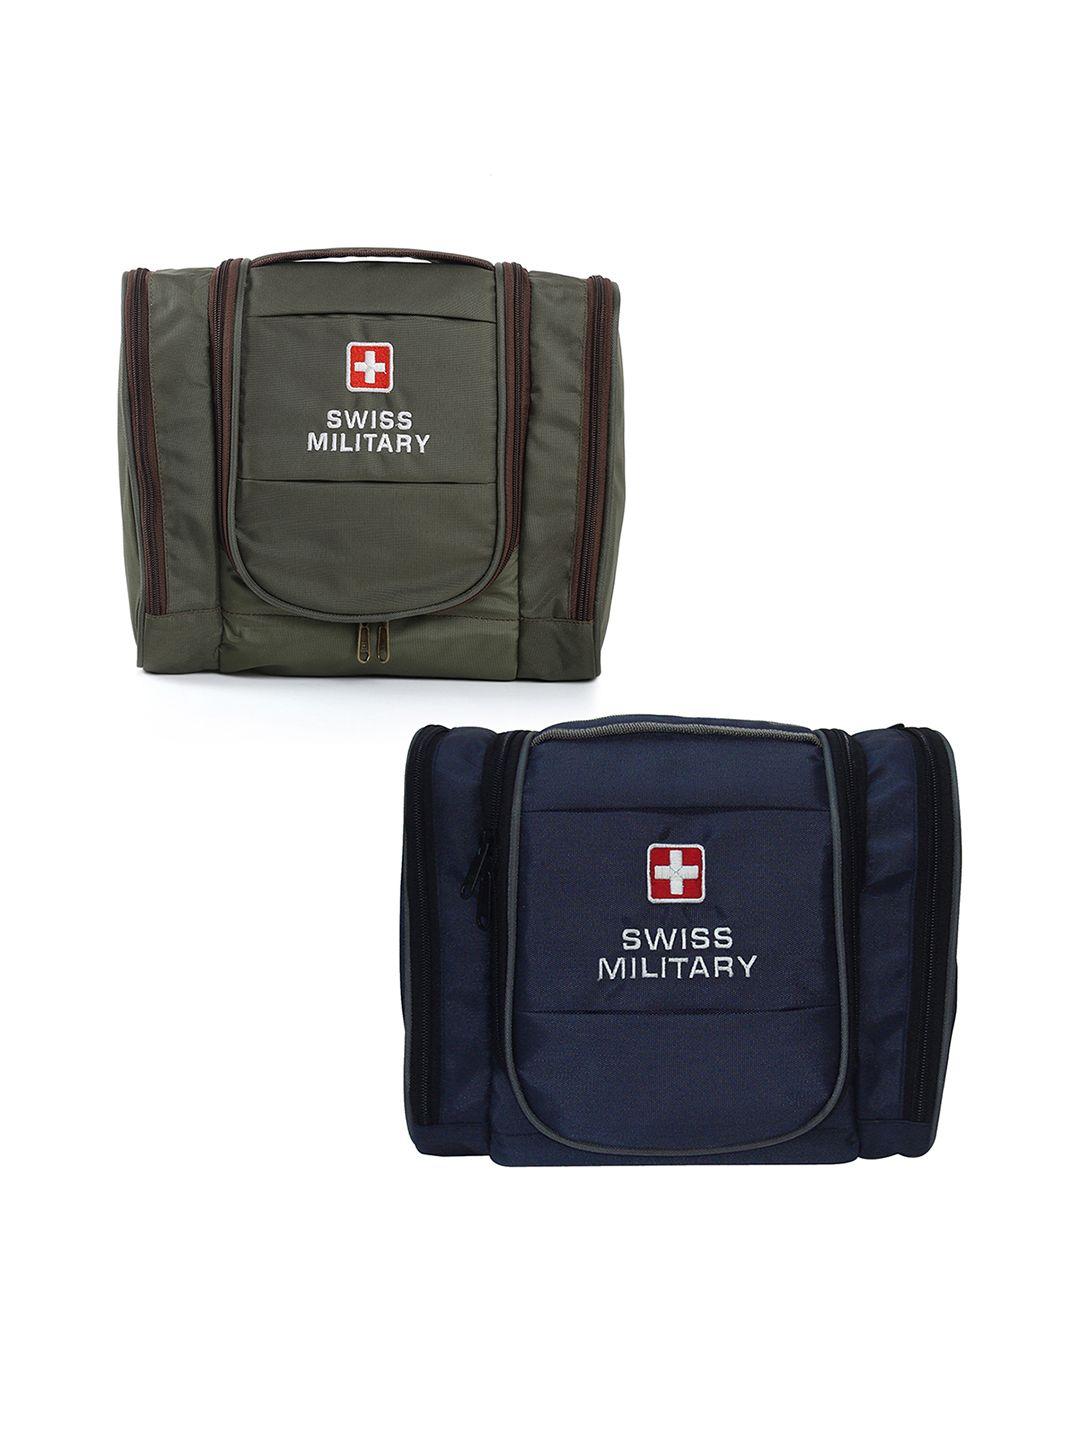 swiss military pack of 2 green & navy blue toiletry bag